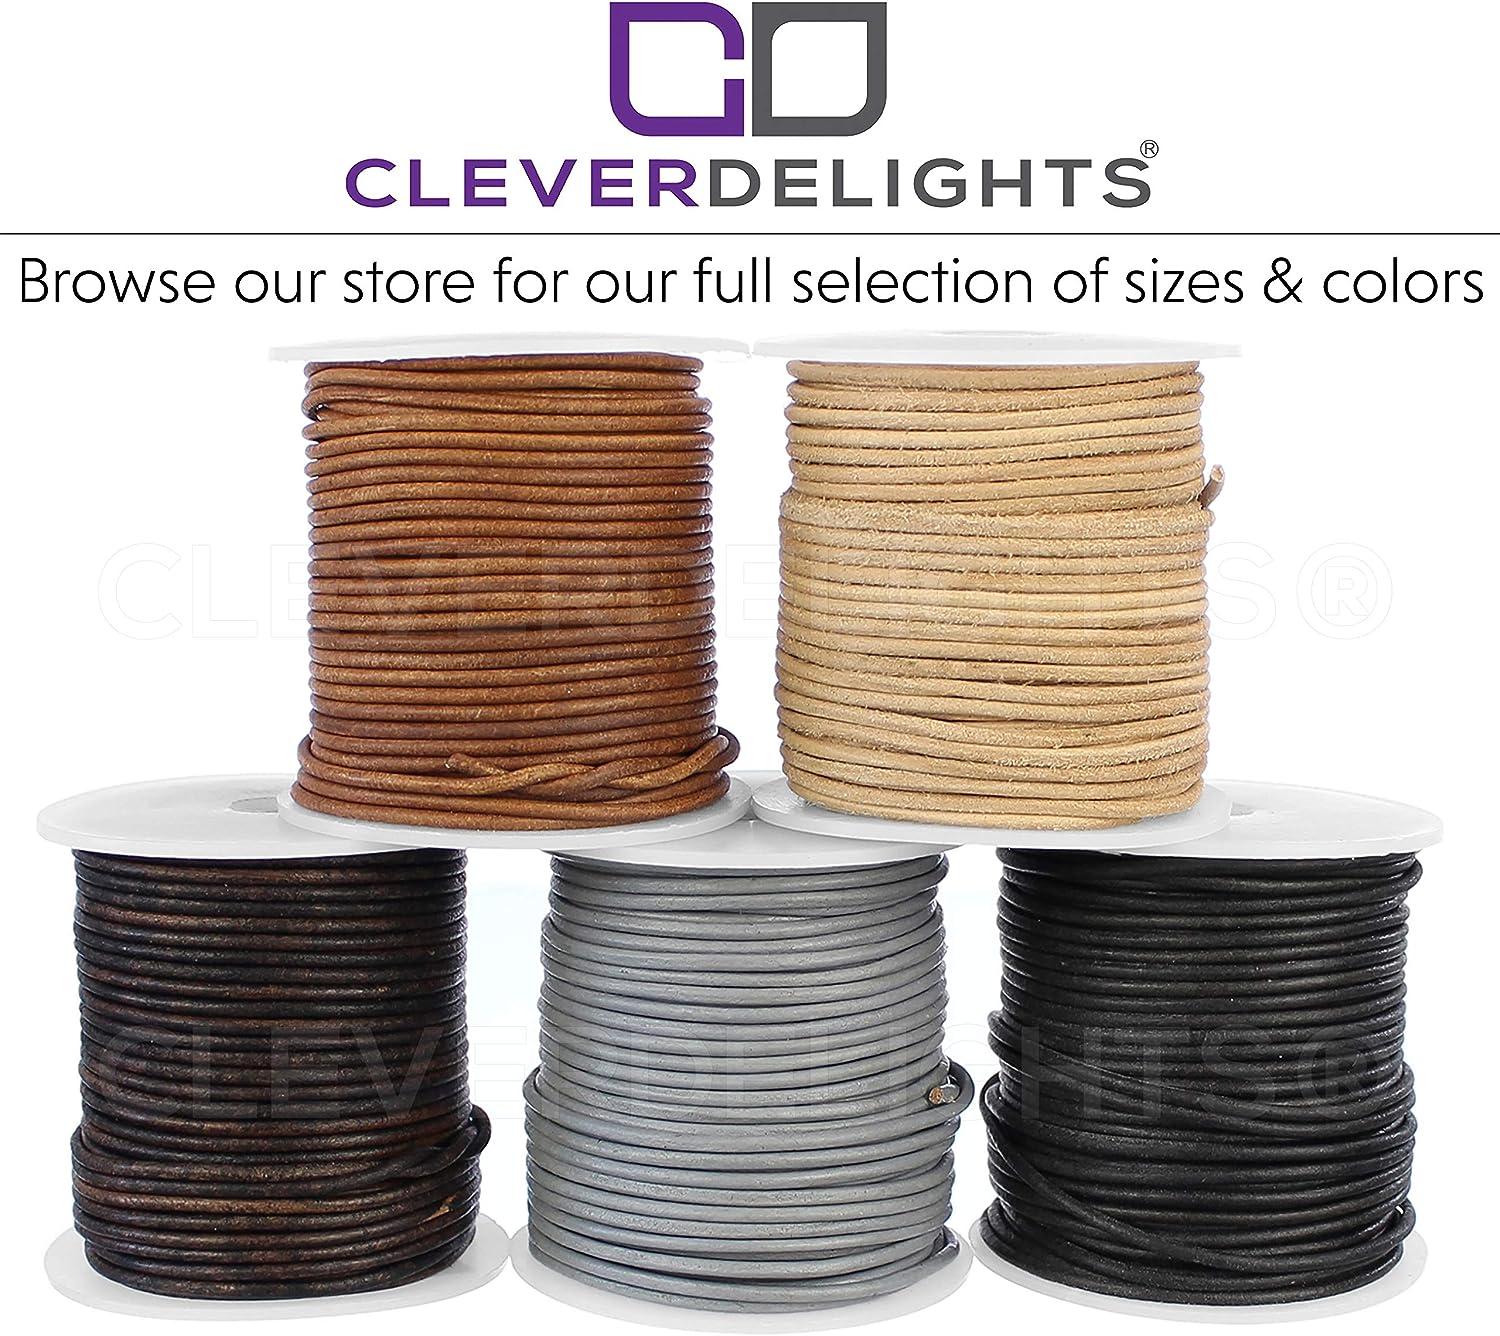 CleverDelights Gray Genuine Leather Cord - 1/16 (2mm) Round - 50 Feet